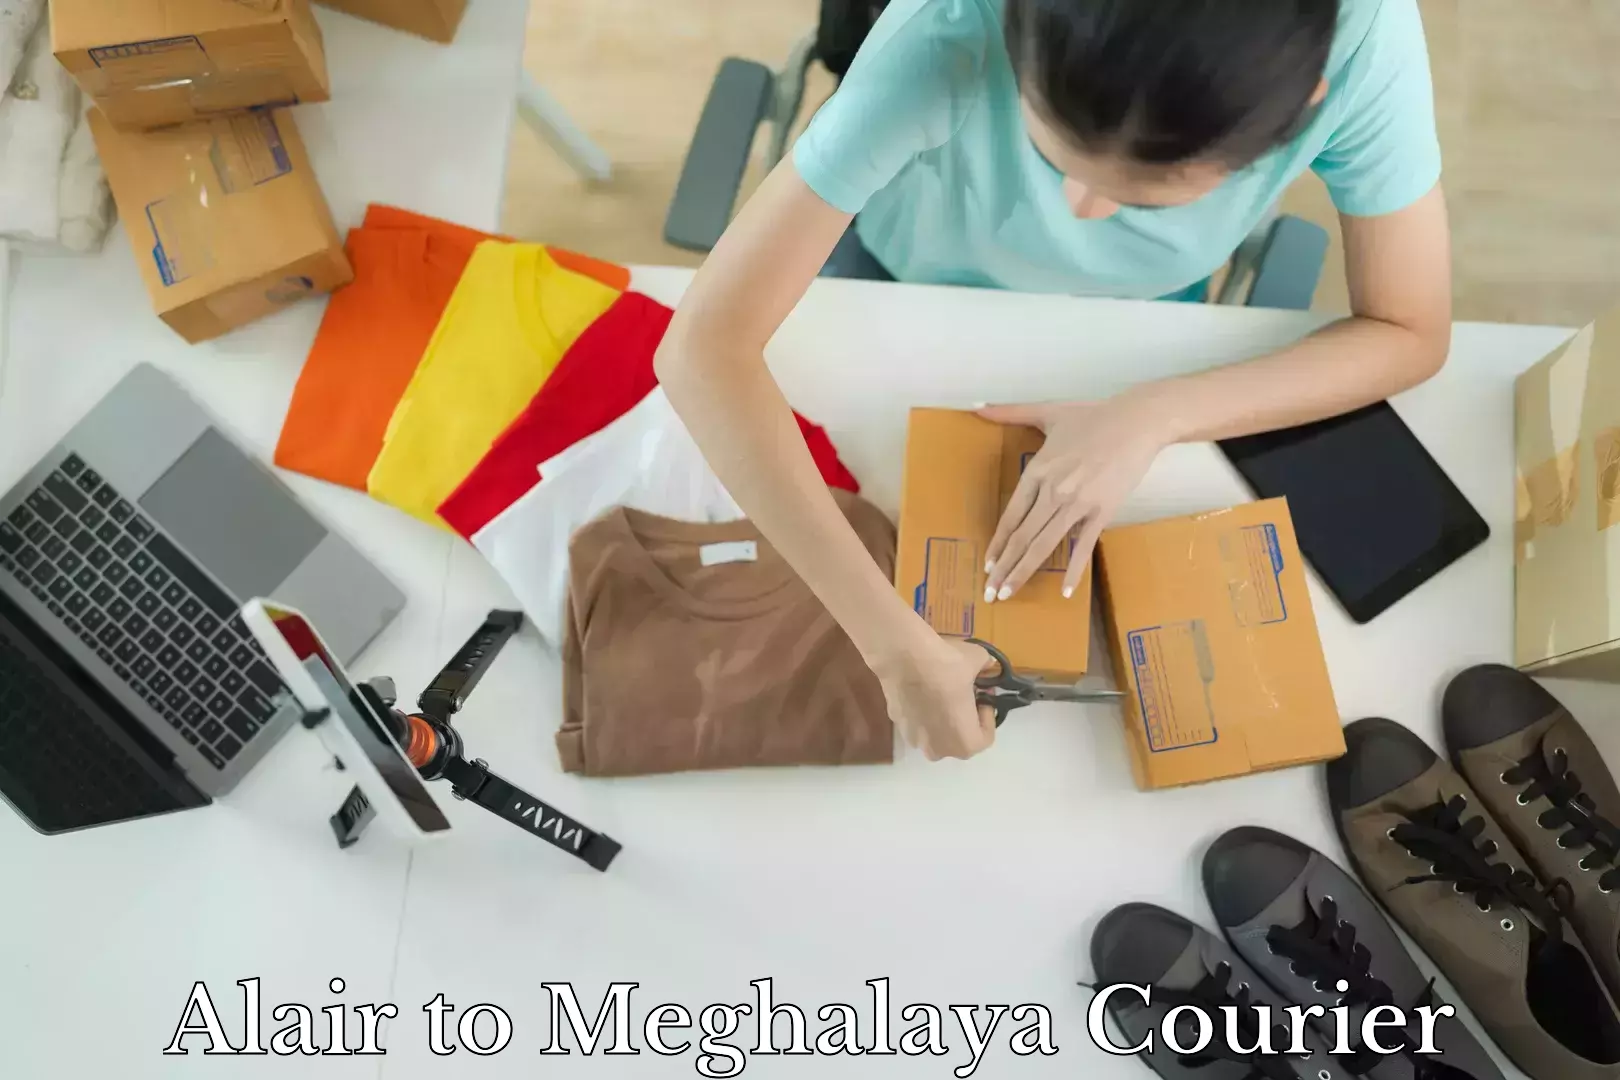 Cash on delivery service Alair to Meghalaya